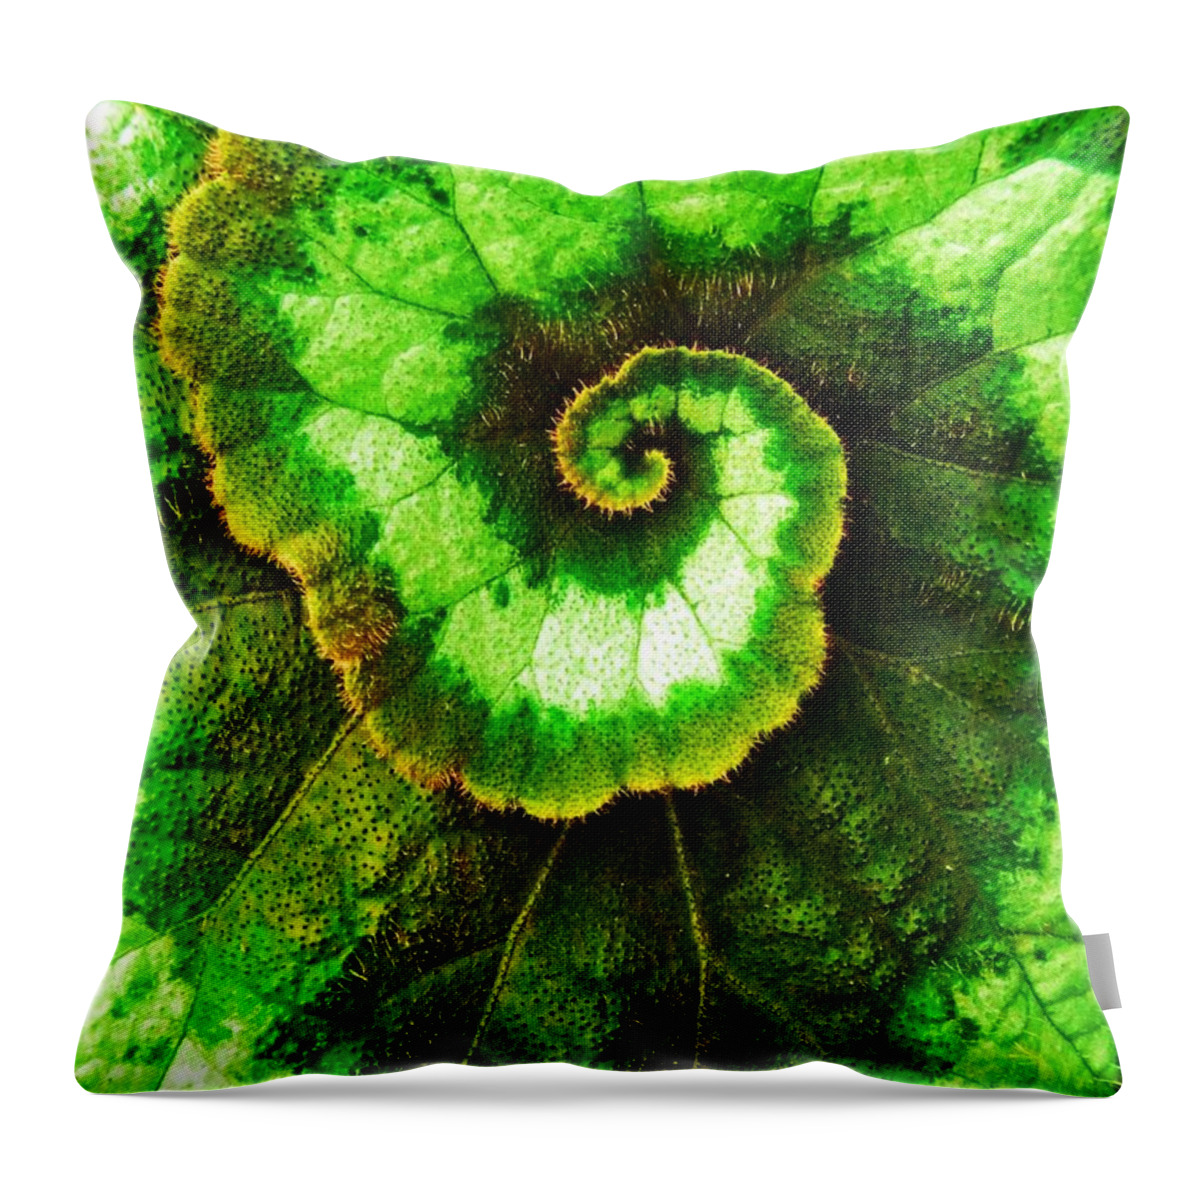 Plants Green Throw Pillow featuring the photograph Spiral Leaf by Michael Ramsey